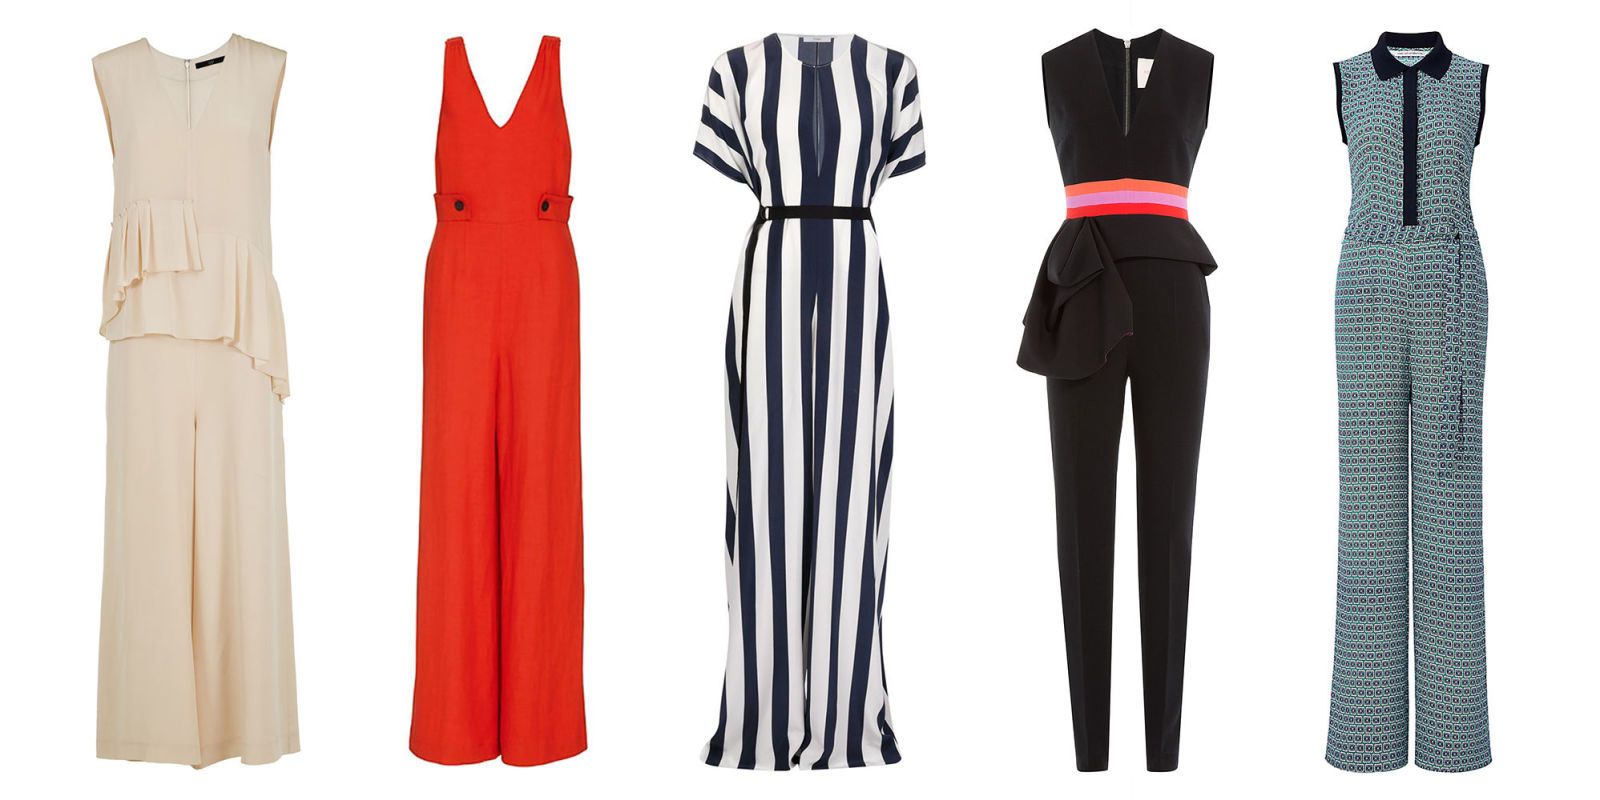 Cute, Colorful, Classy & Trendy Rompers & Jumpsuits | Filly Flair Boutique  · Filly Flair